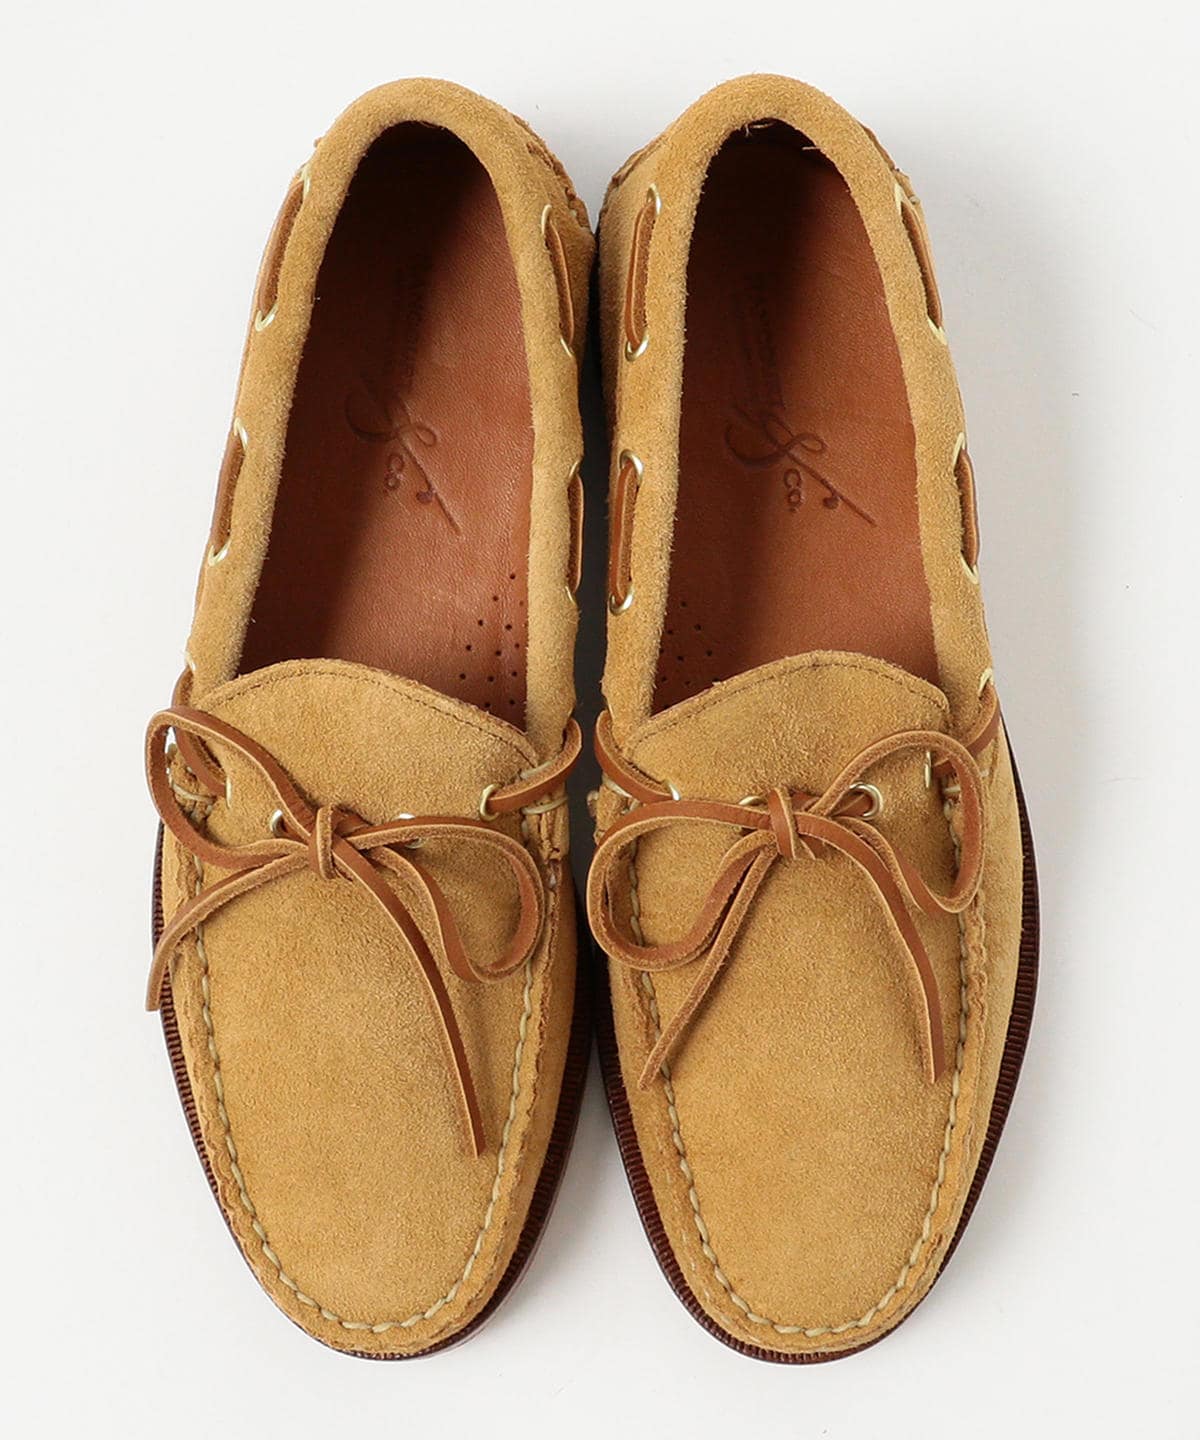 BEAMS PLUS（ビームス プラス）RANCOURT＆Co. / 別注 Boothbay Loafer ...